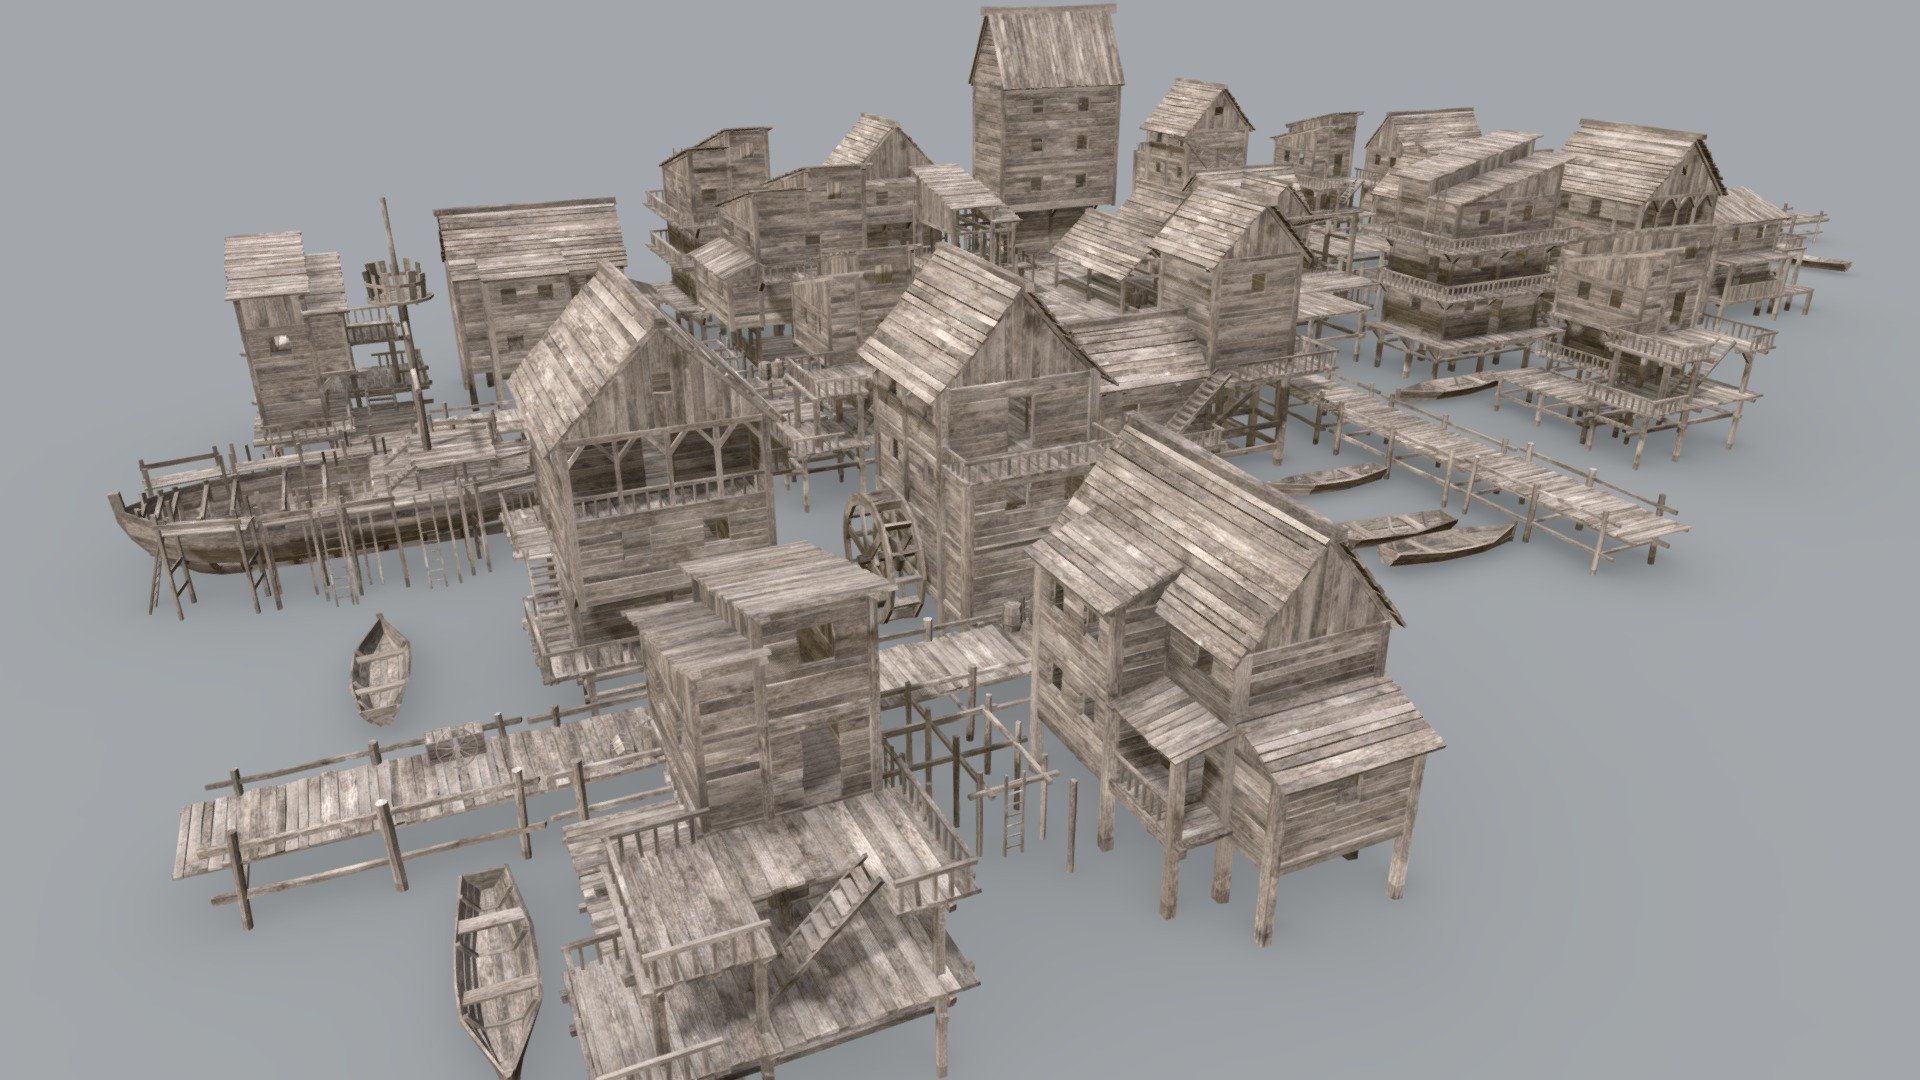 This modular set allows you to create pirate town,fishing town or any medieval scenes of cities. The set uses seamless and tiled textures, so you can easily apply your own texture to get your own design and look. Every part is neat and polished. Clean wireframe.Every detail is worked out by hand.Designed to be modifiable.Includes 16 wooden buildings,barrels, boats, crates and other furnishings. In total 54 objects. The model is suitable for creating a game. The model is detailed inside and out. 

Purchase: 

https://www.artstation.com/a/19958225

https://www.unrealengine.com/marketplace/en-US/product/pirate-town - Fishing Town - 3D model by Crazy_8 (@korboleevd) 3d model